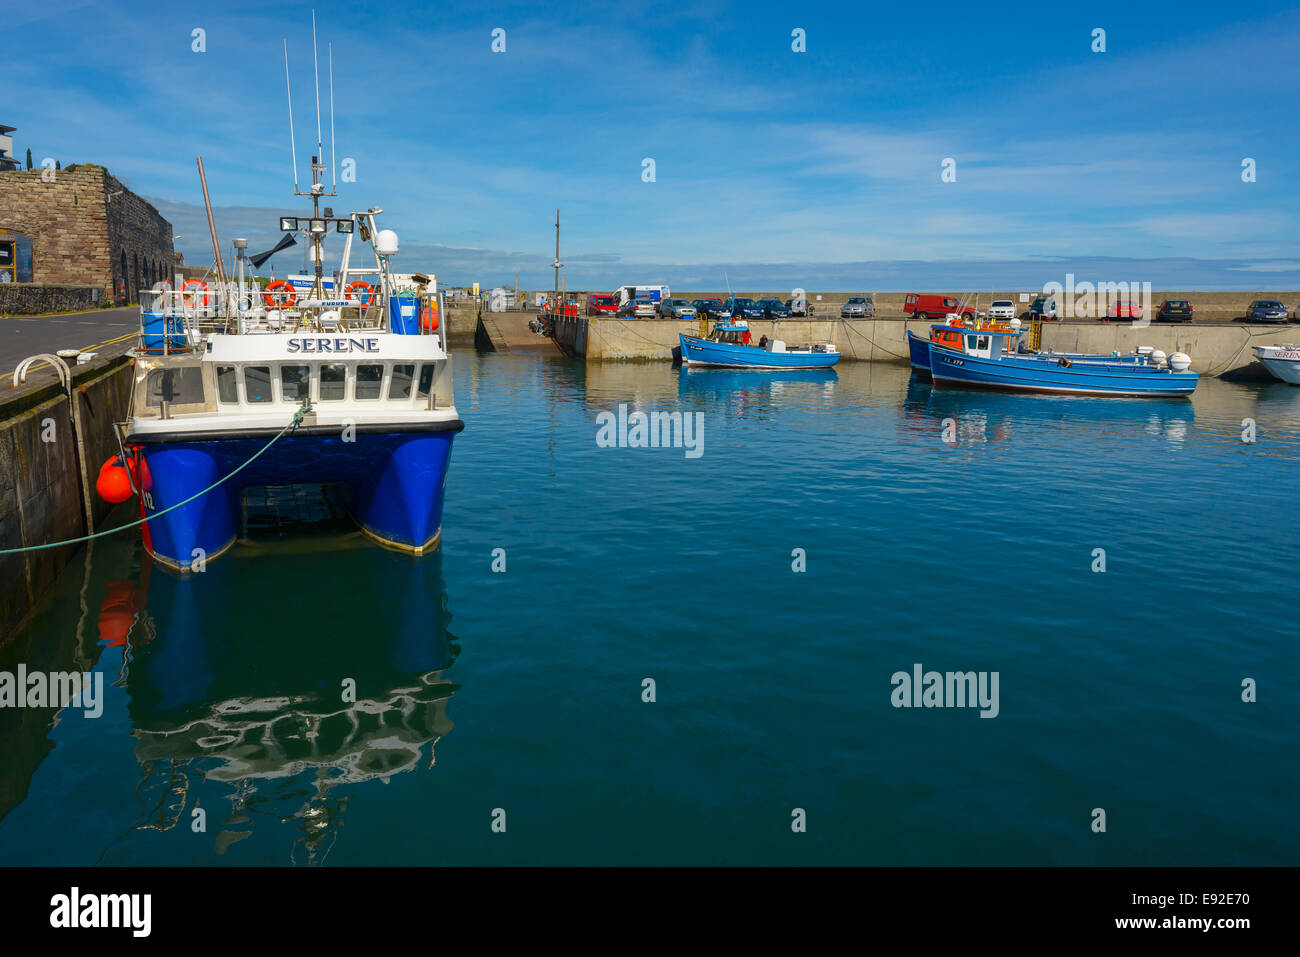 Boats_moored_in_Seahouses_Harbour_Harbor